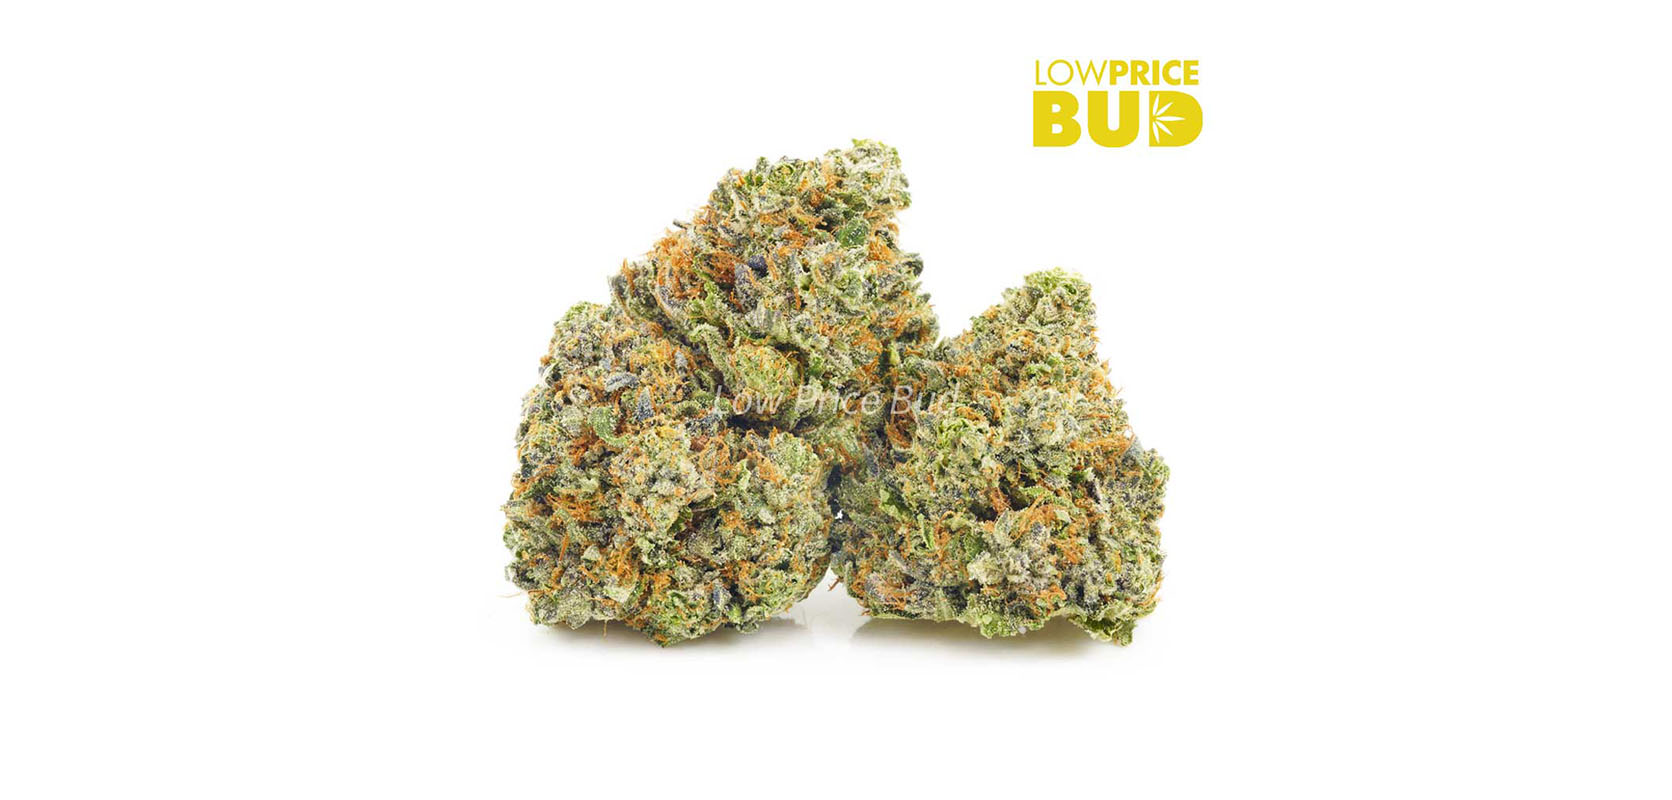 Rainbow Driver buds and popcorn cannabis from online dispensary Low Price Bud.